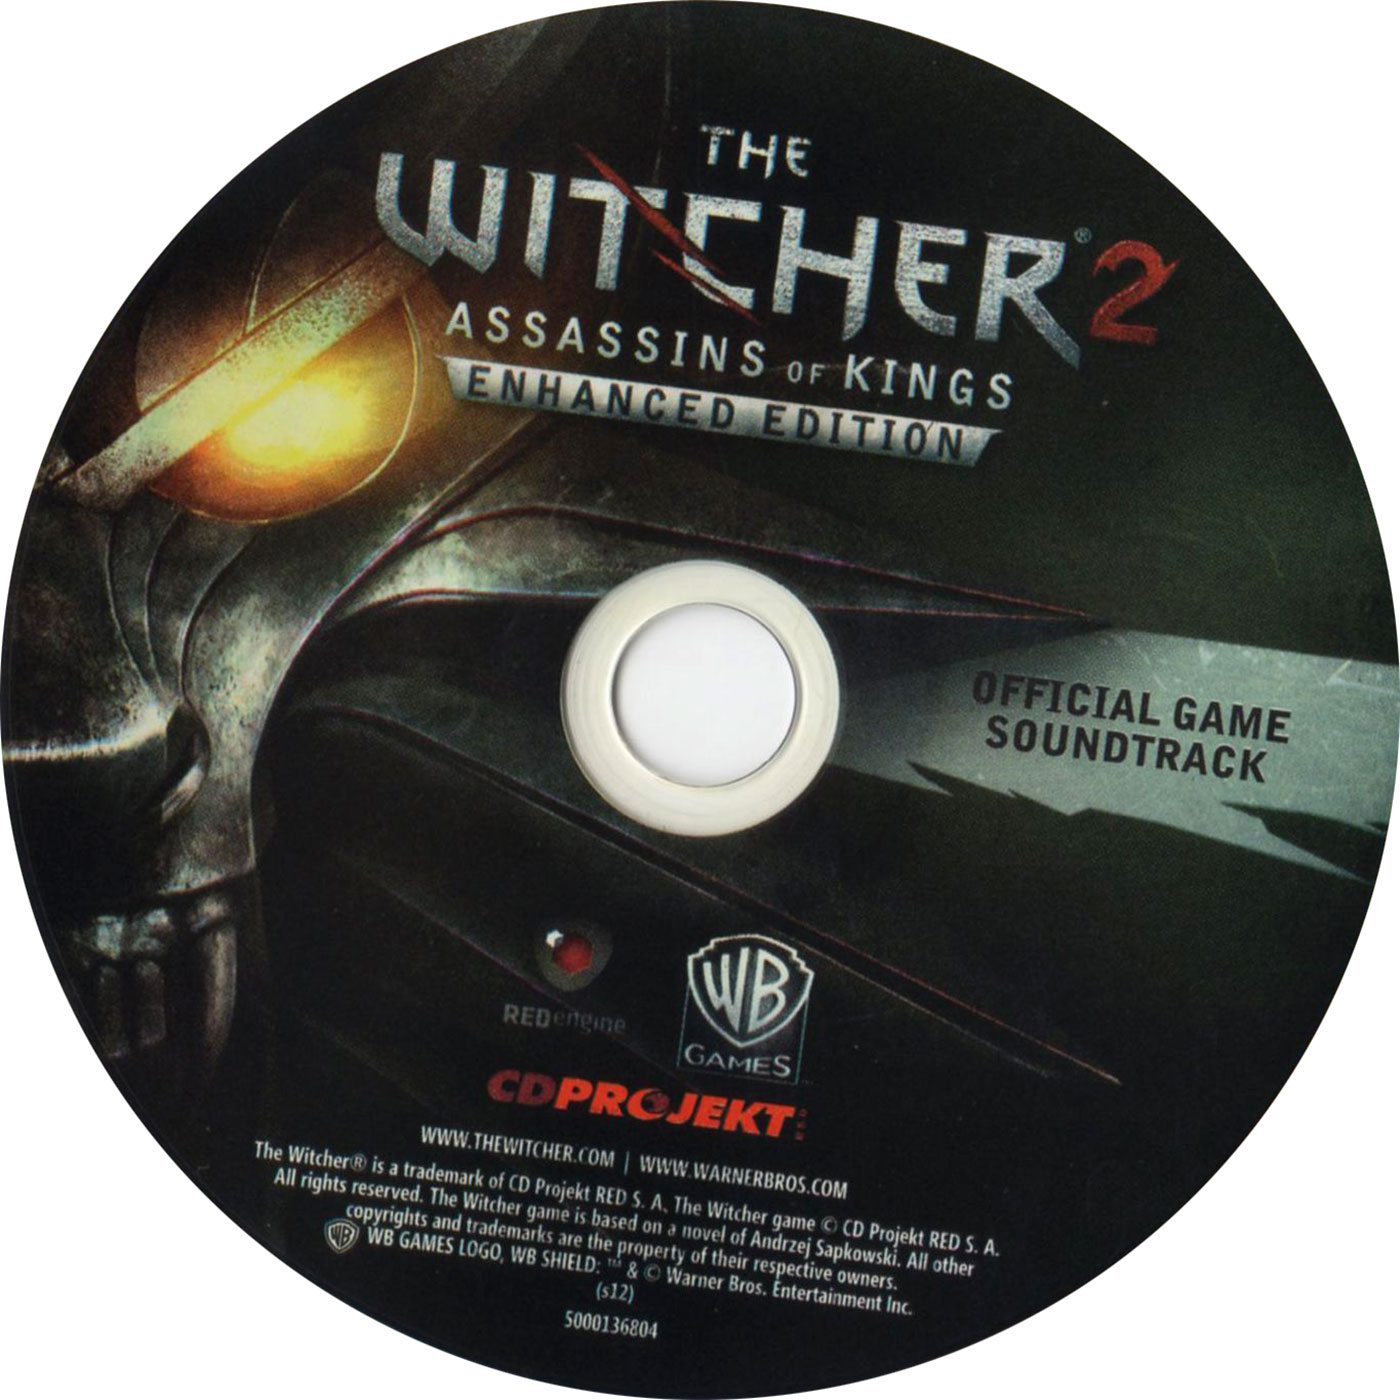 The Witcher 2: Assassins of Kings Enhanced Edition - CD obal 5